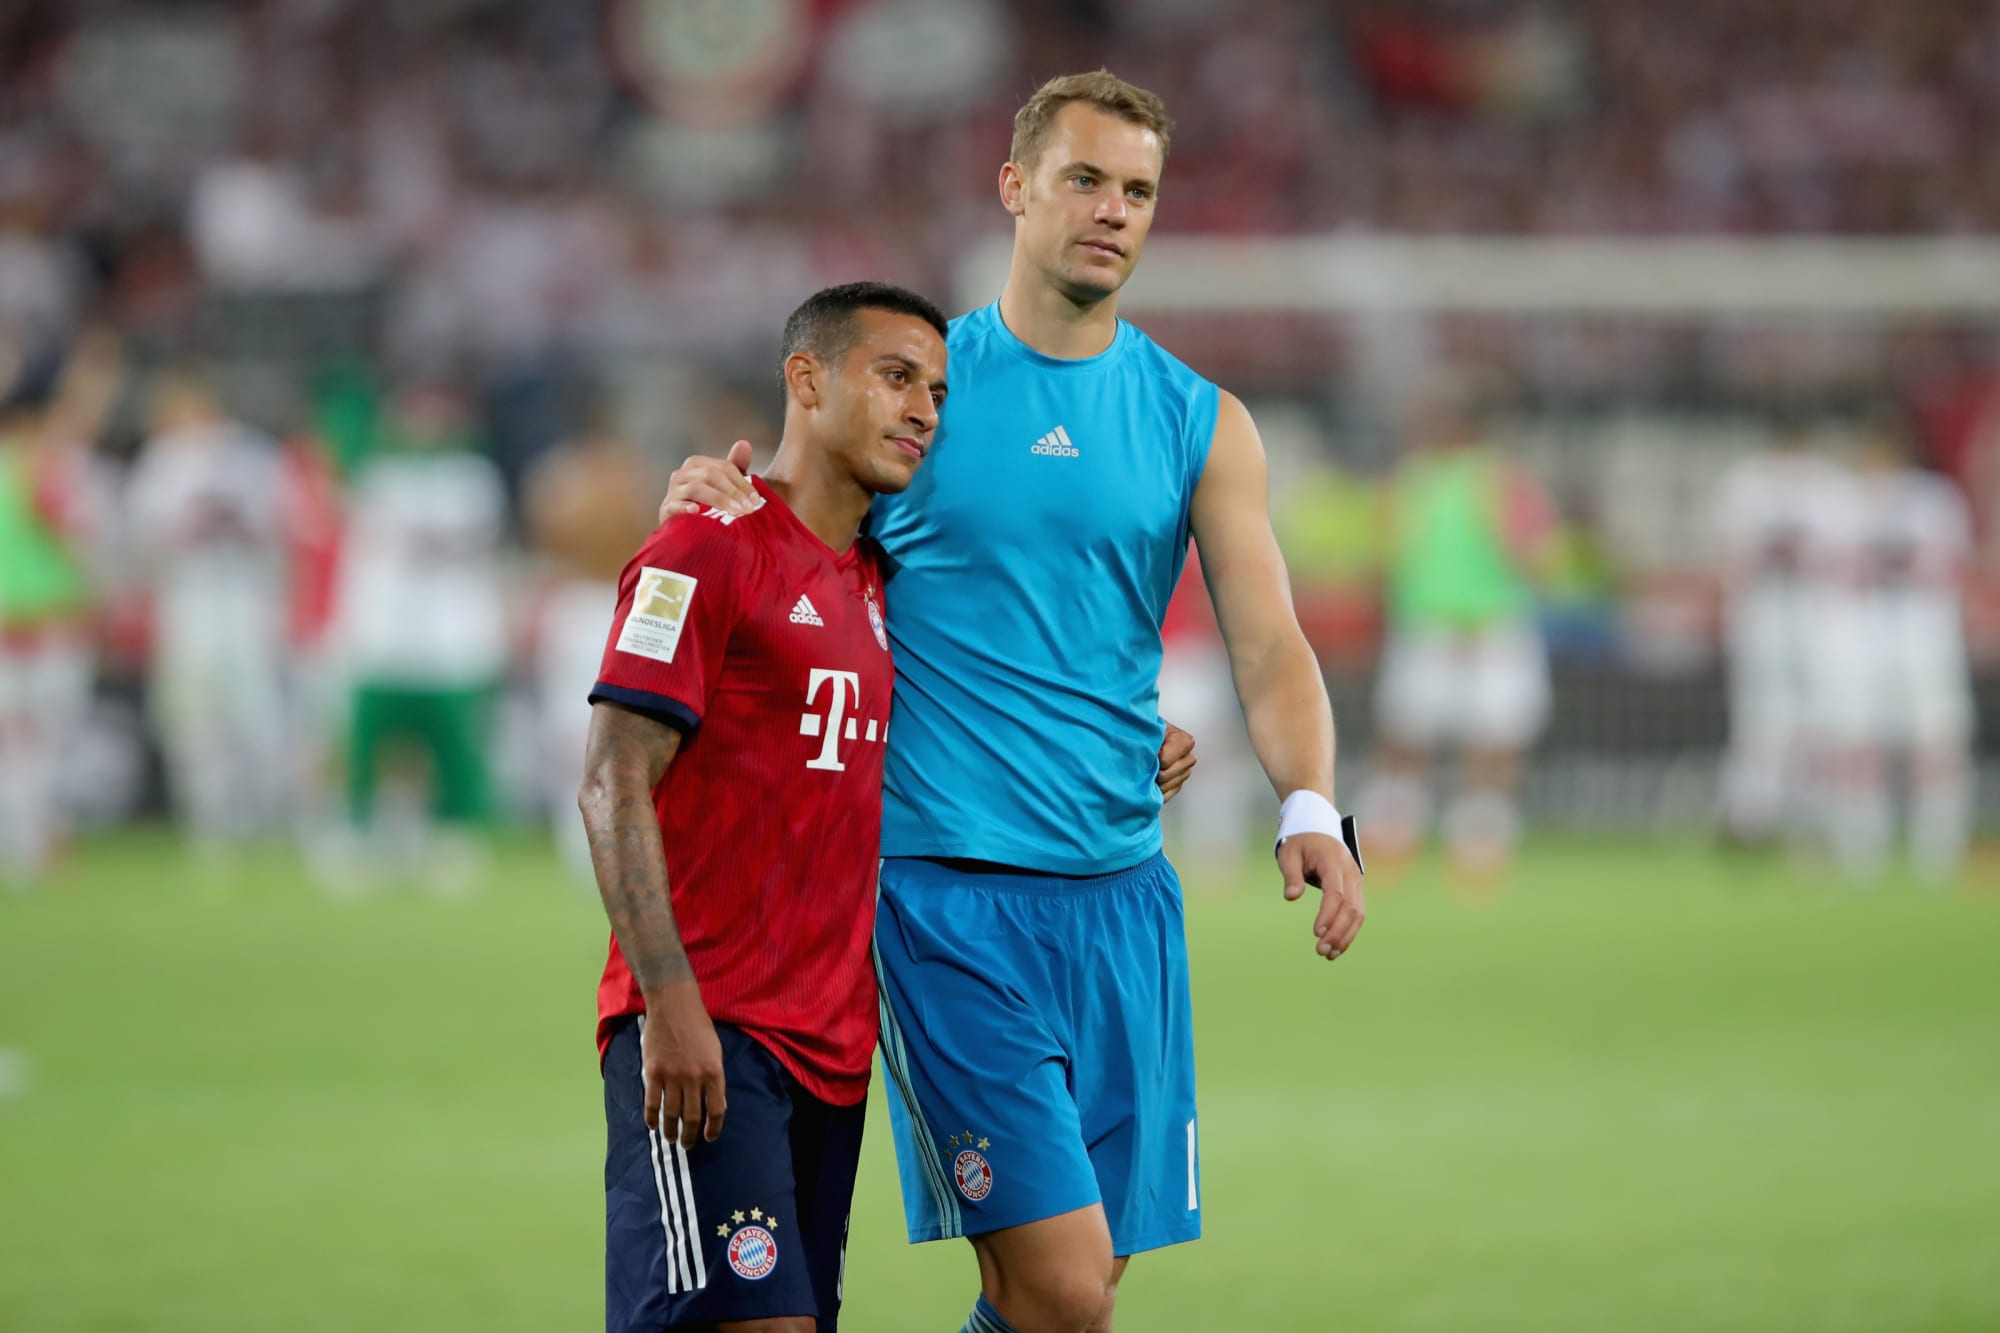  Two Bayern Munich players console each other after losing the 2018 DFB Cup final.